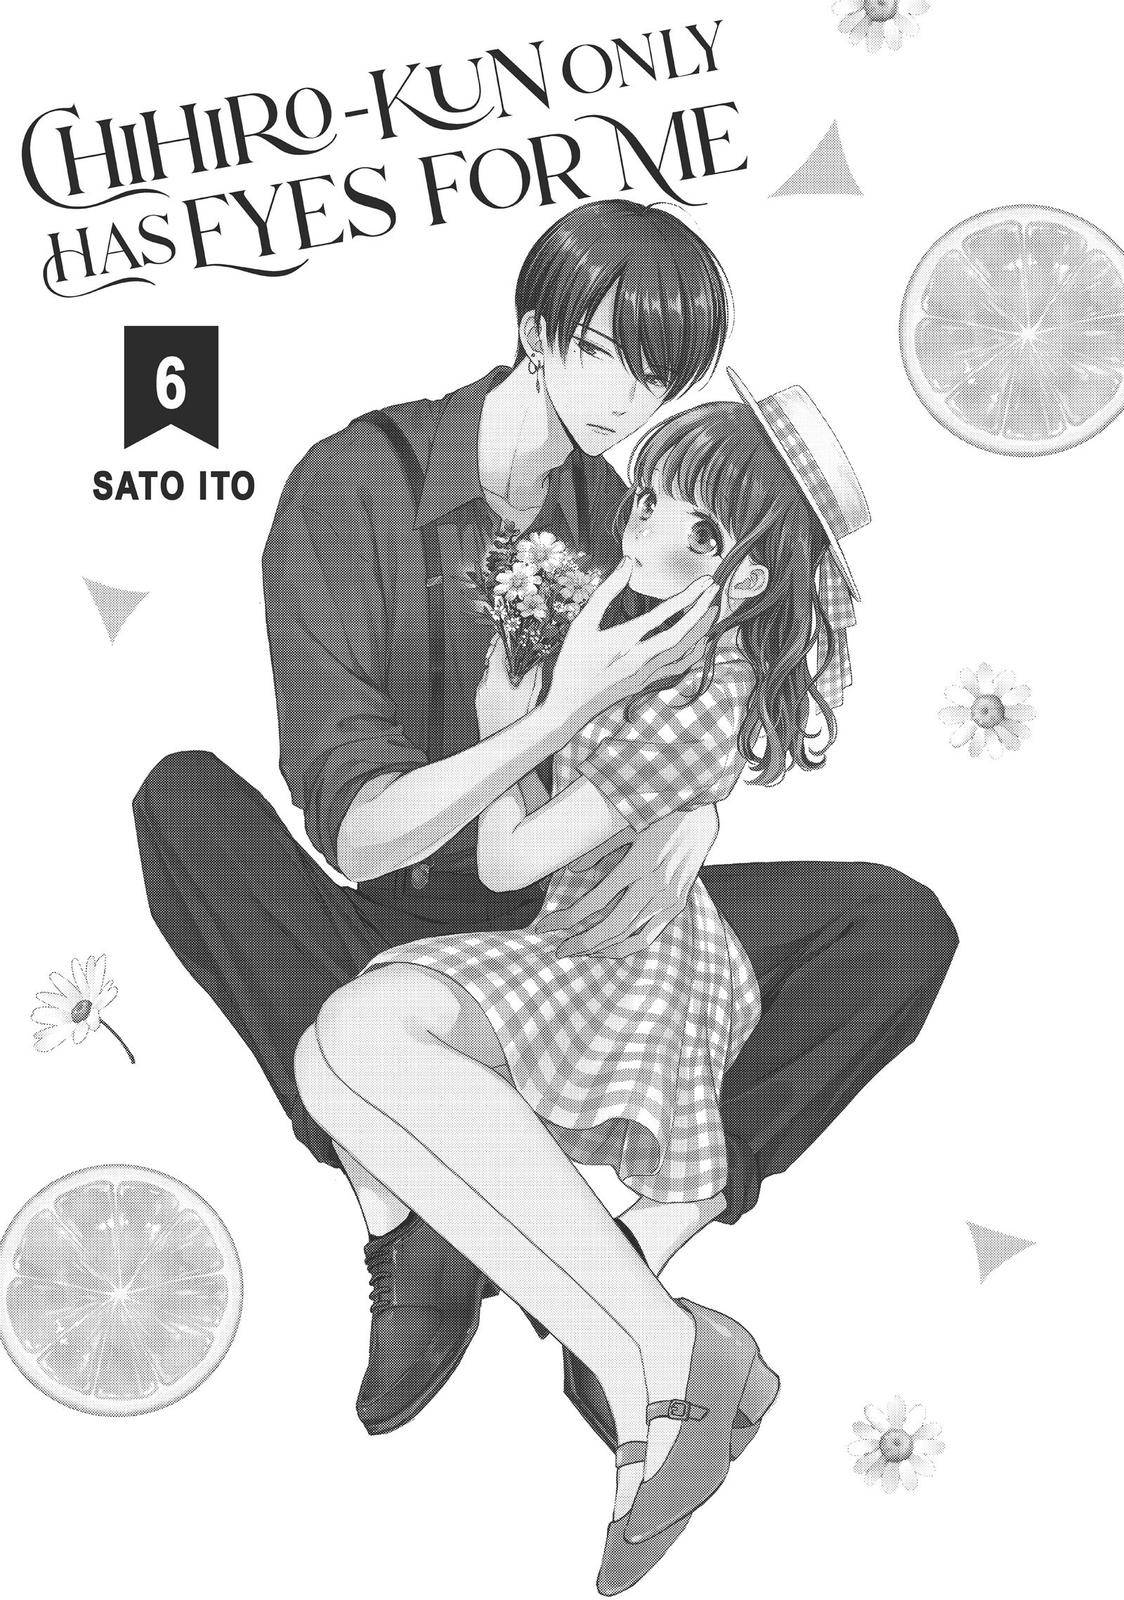 Chihiro-kun Only Has Eyes for Me - chapter 21 - #2